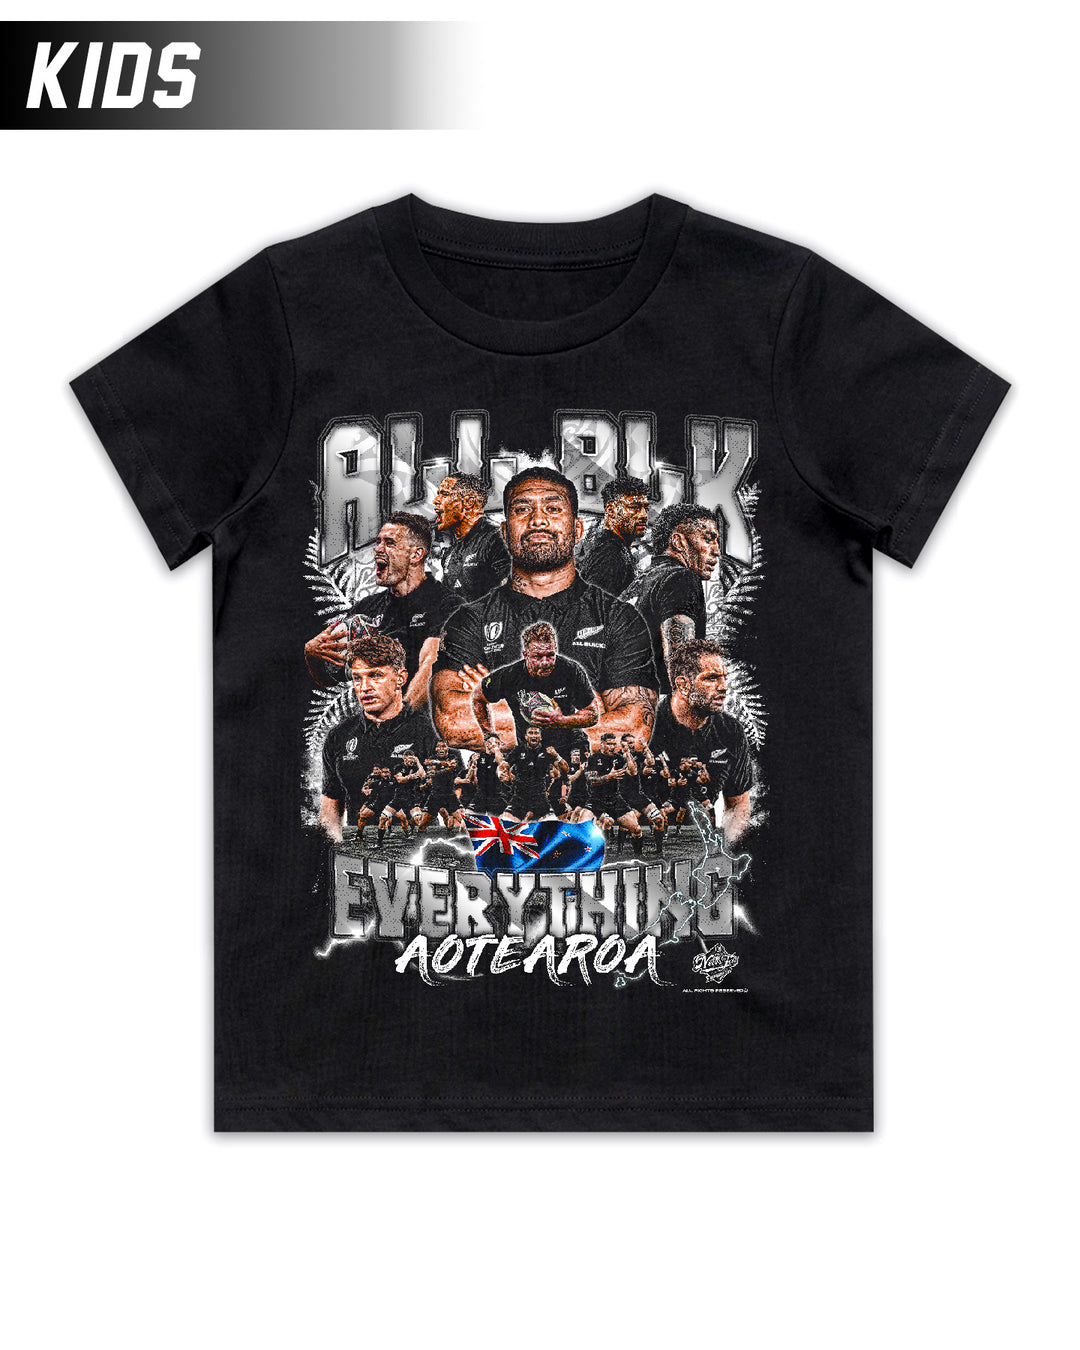 All Blk Everthing Tee - Kids